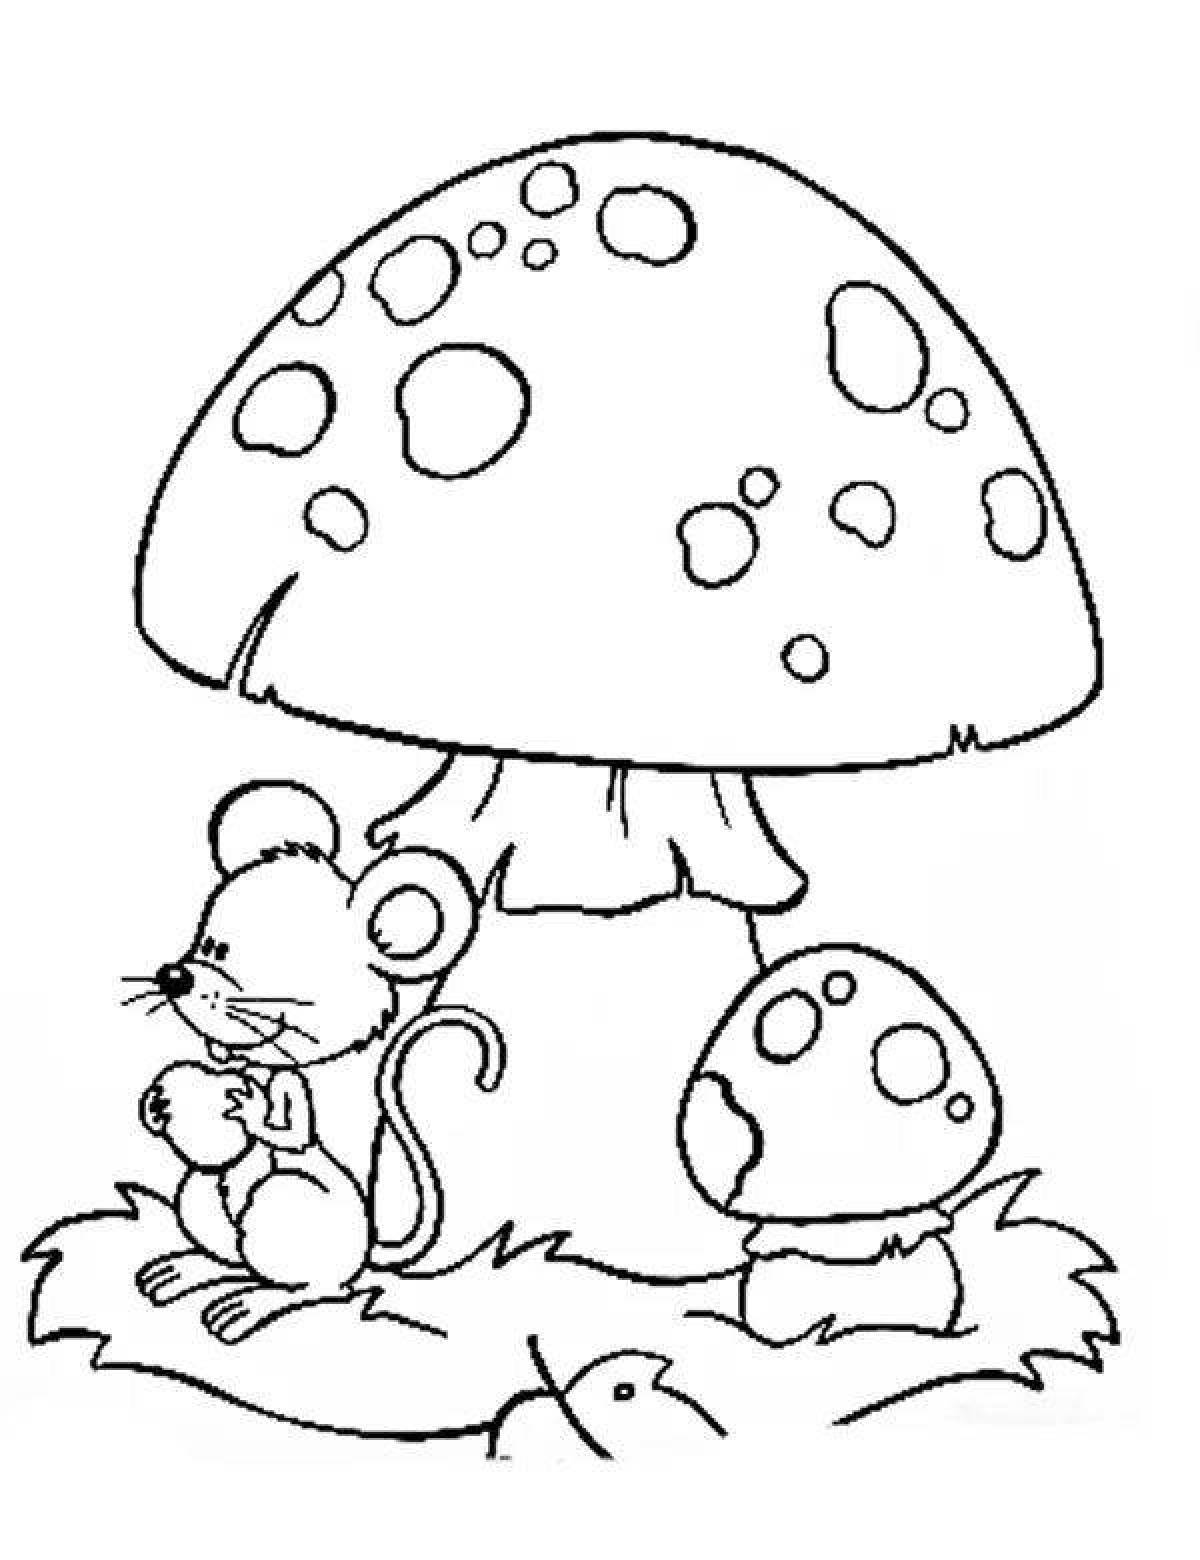 Coloring book magical fly agaric